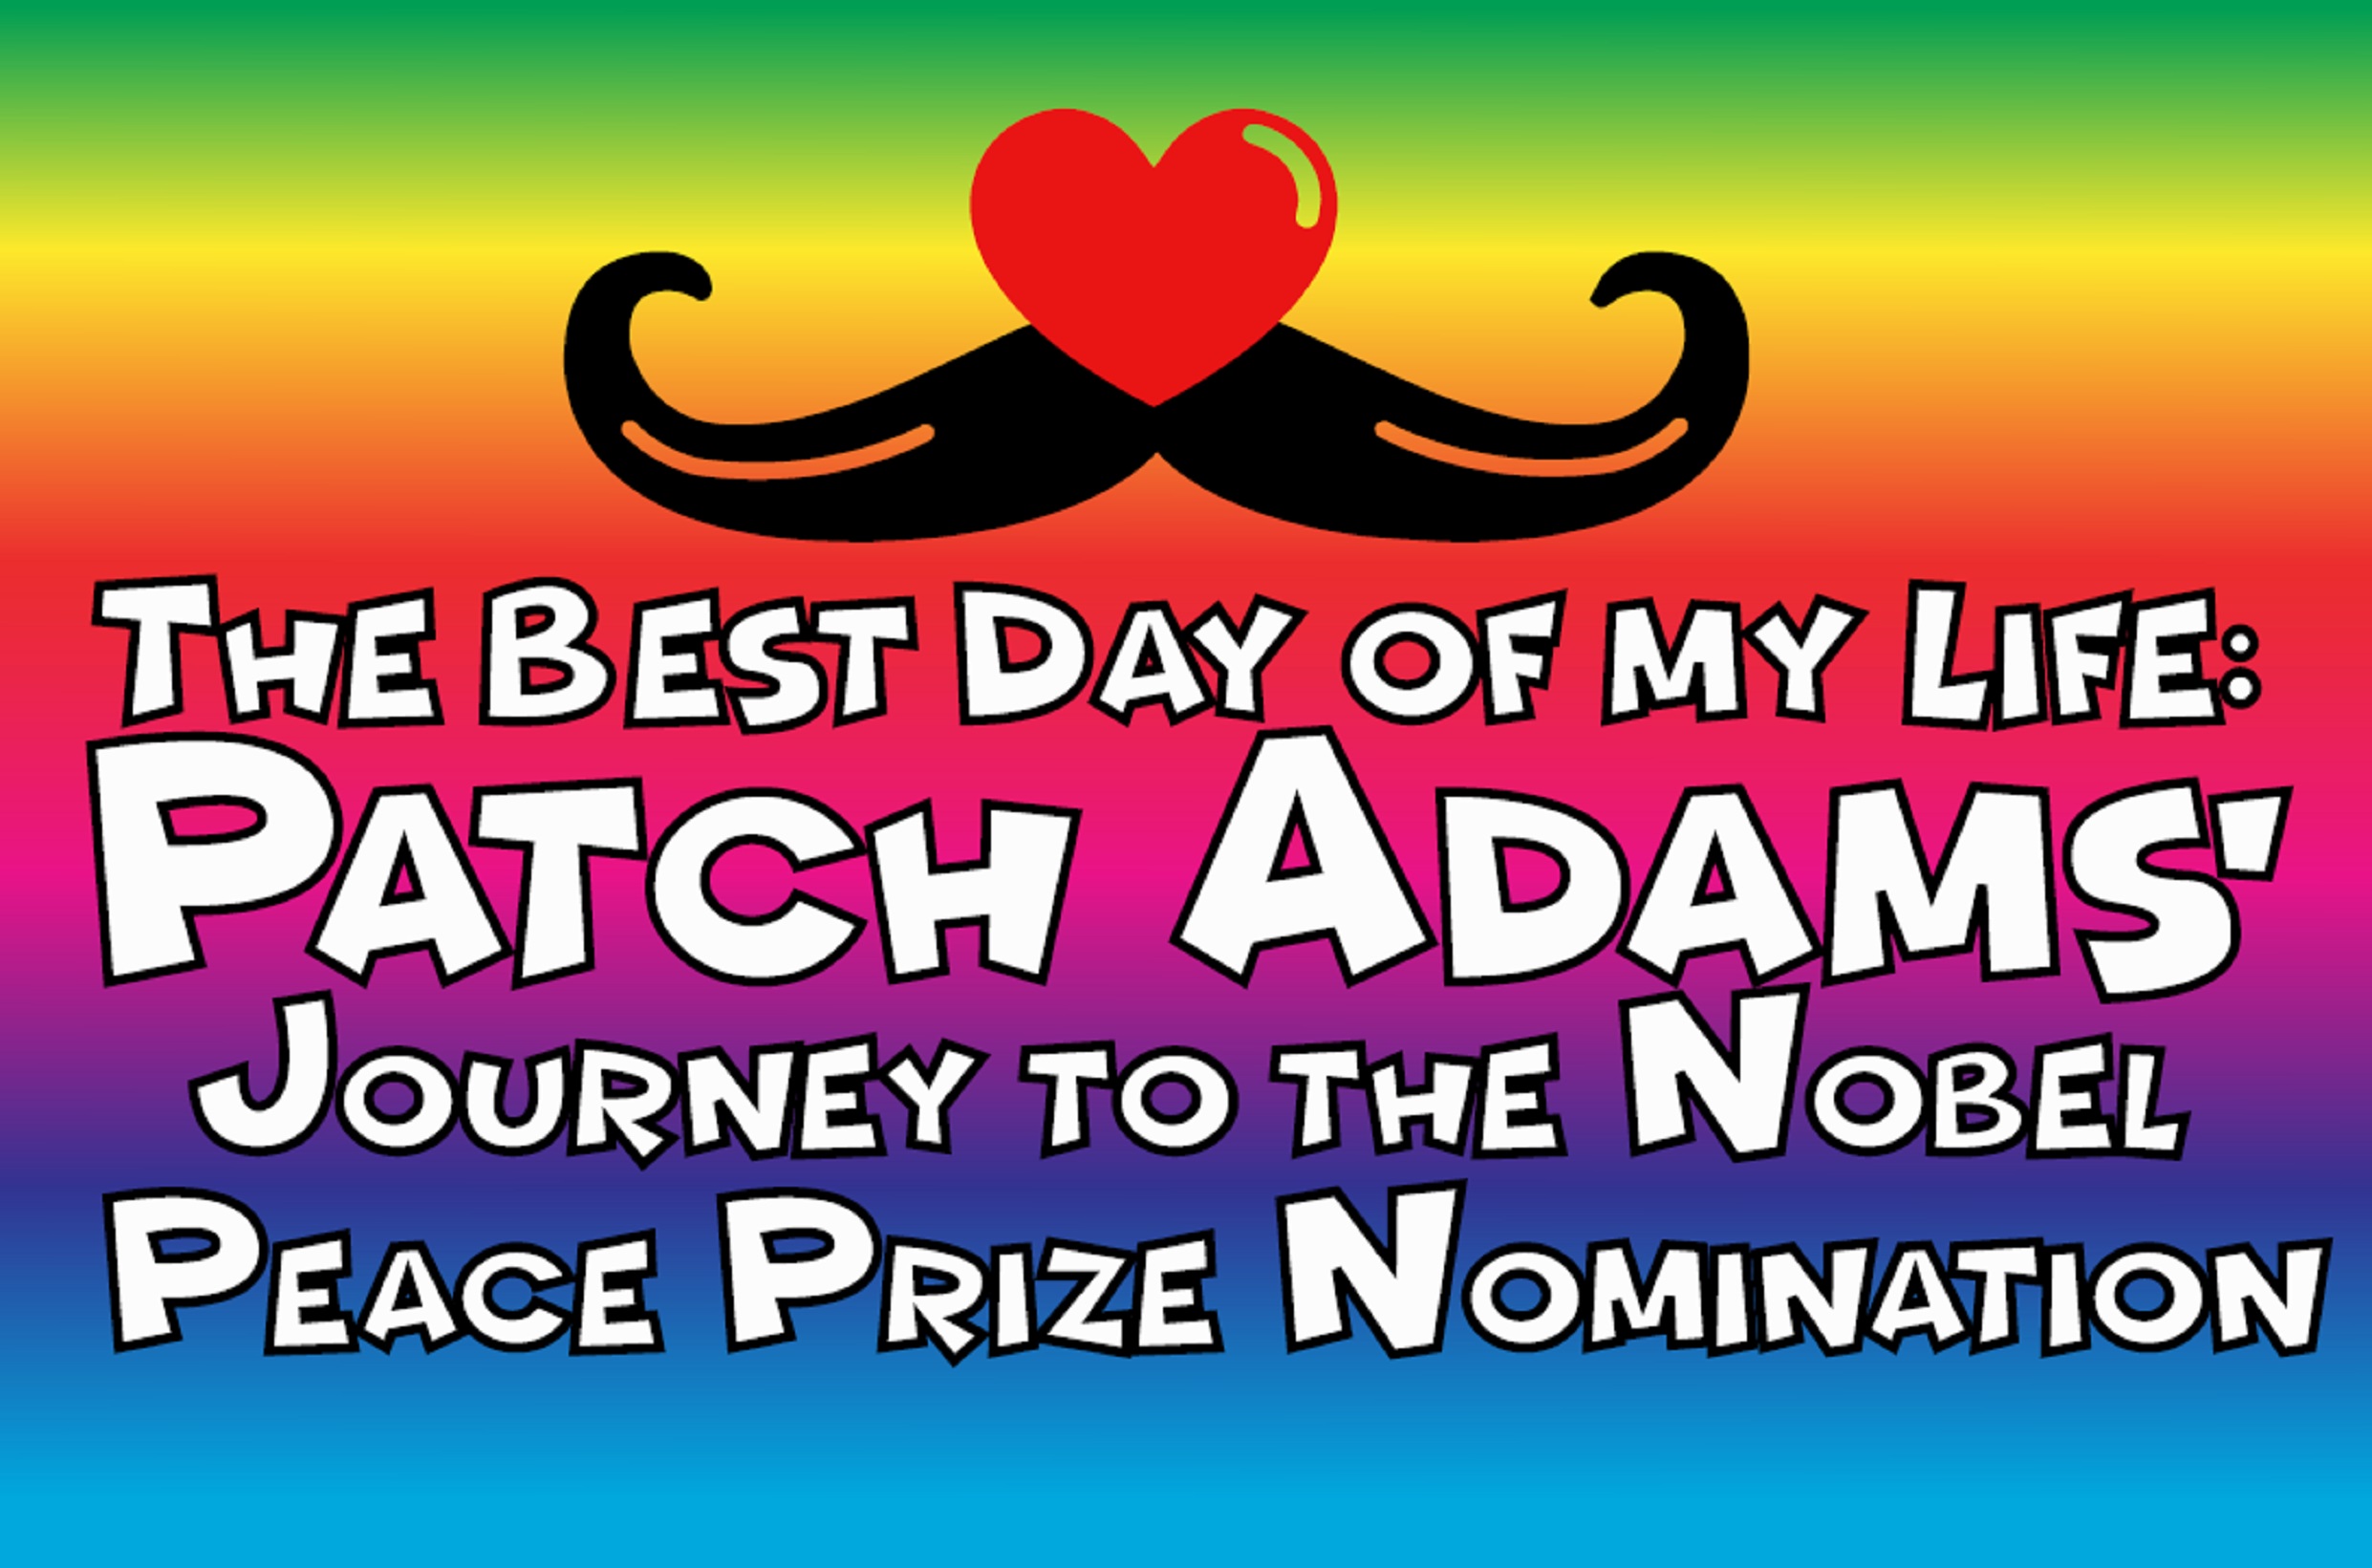 Dr. Hunter “Patch” Adams nominated for the 2021 Nobel Peace Prize